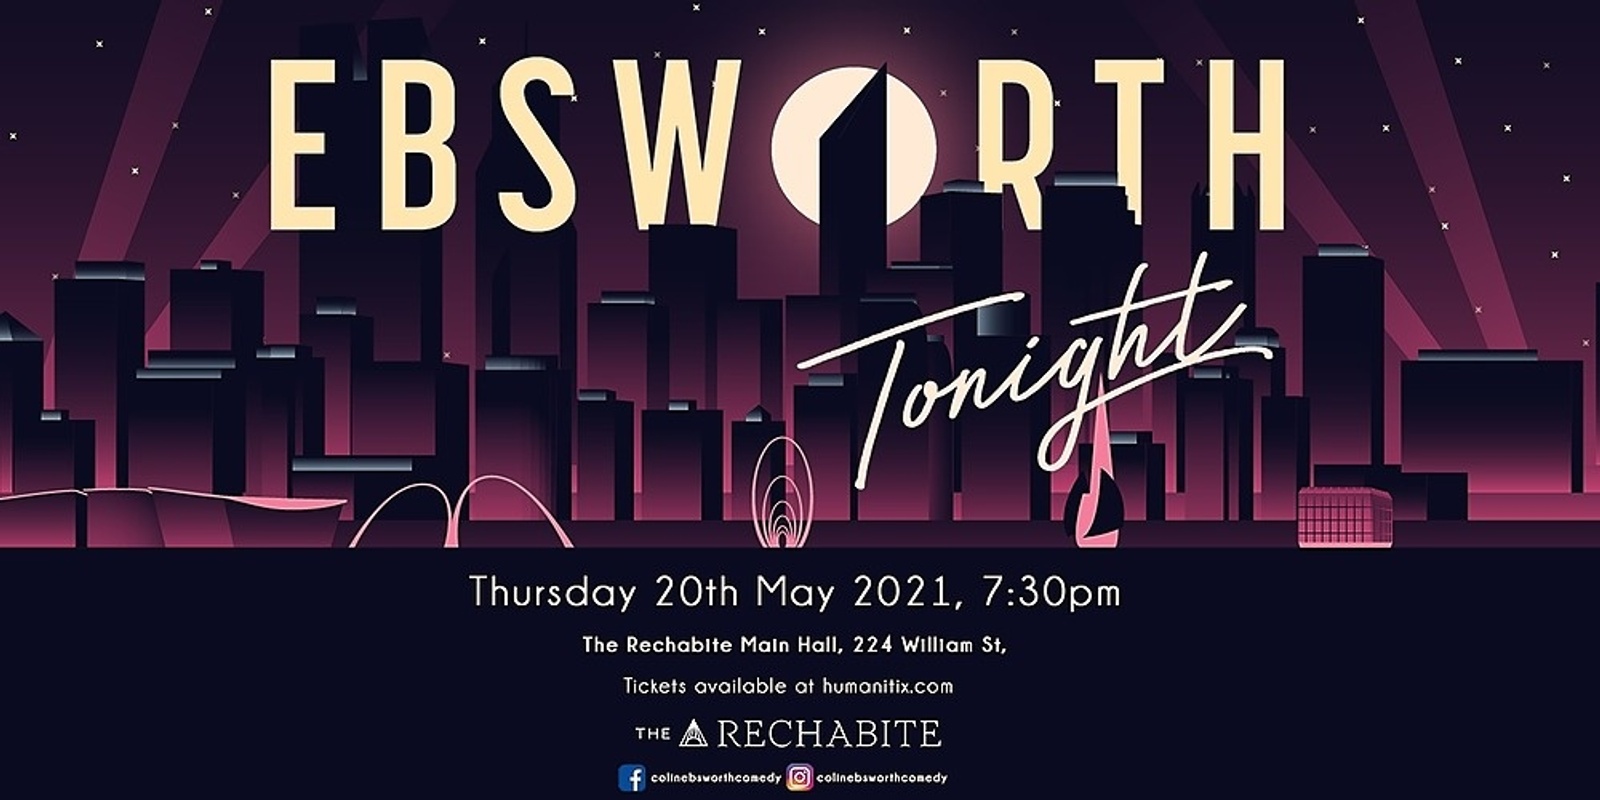 Banner image for Ebsworth Tonight RESCHEDULED DATE